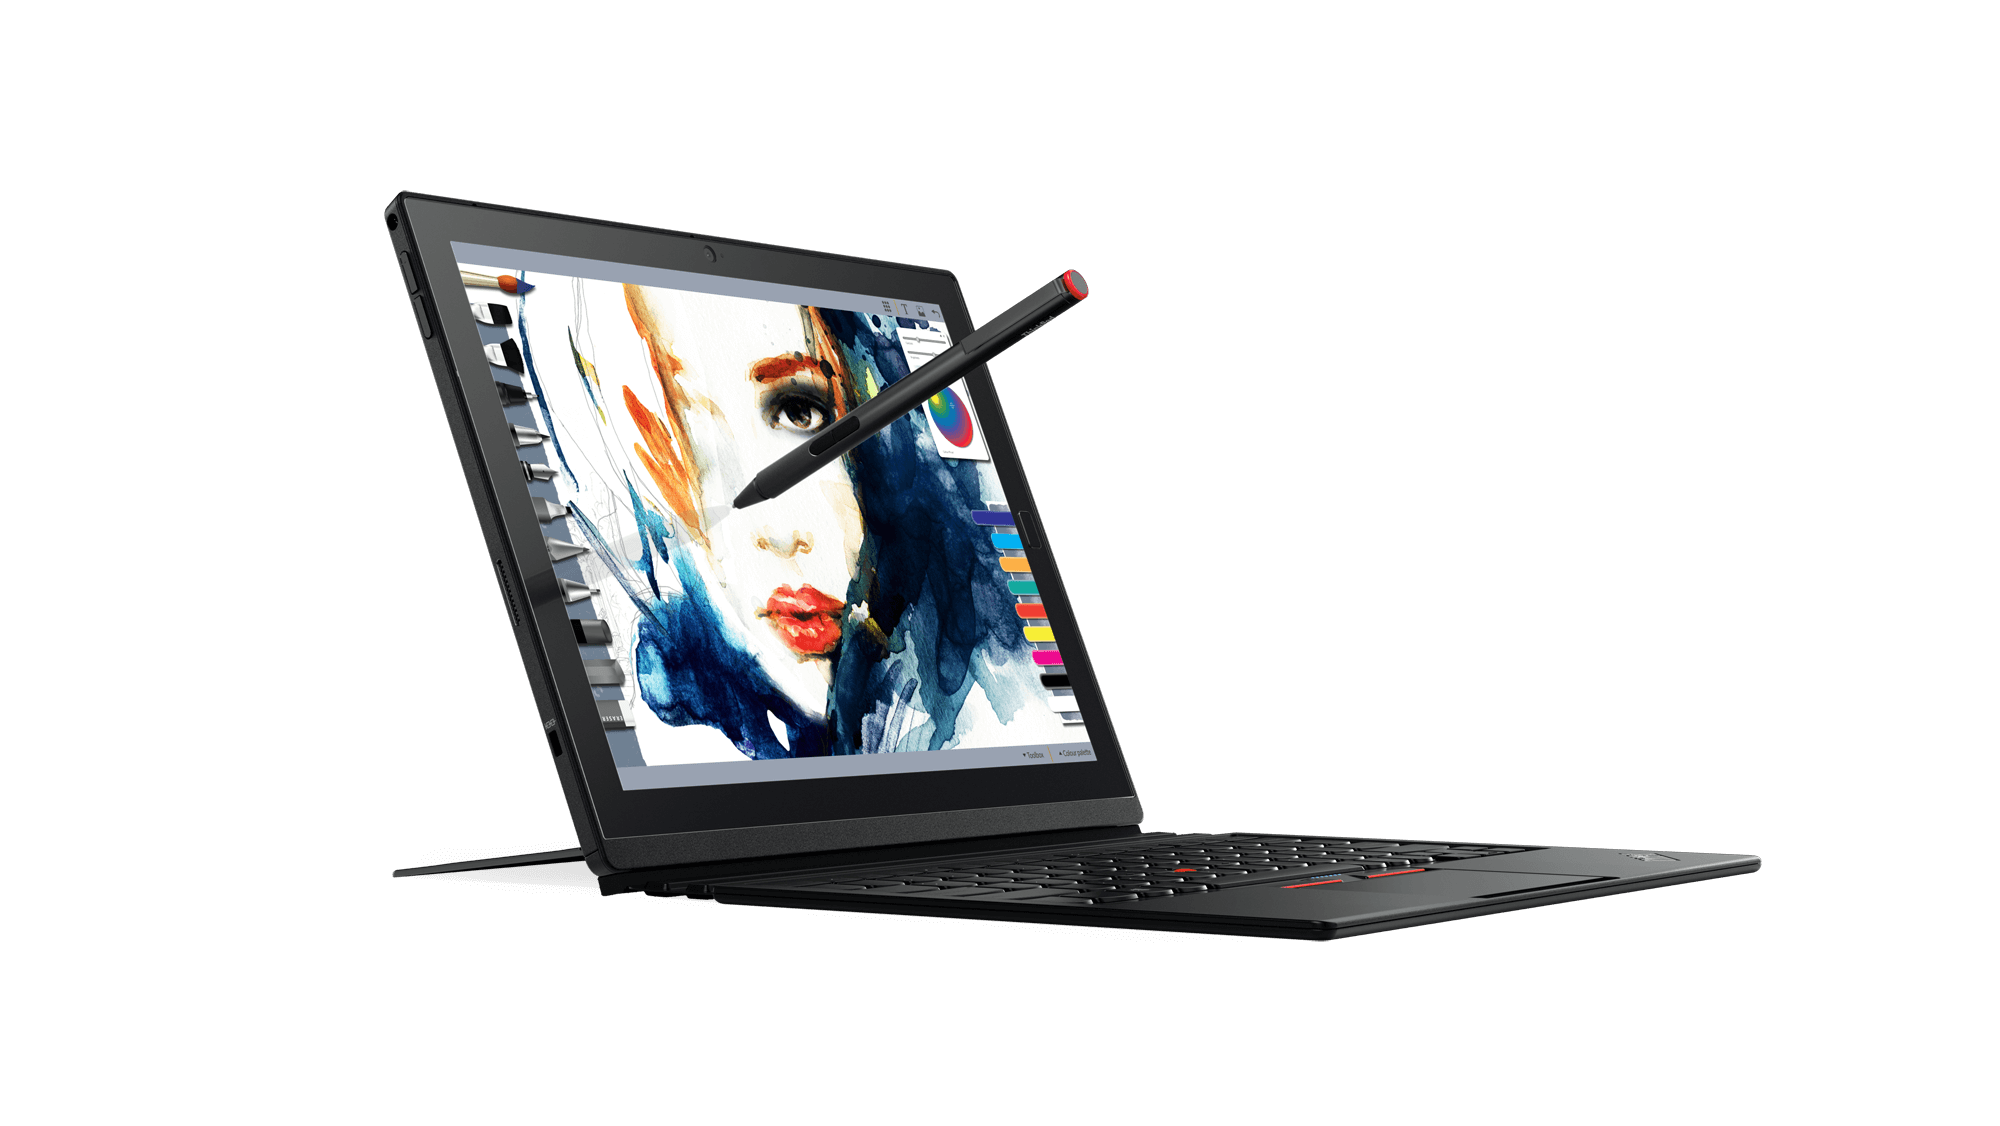 Lenovo's ThinkPad X1 Tablet with keyboard attached and pen on hand.